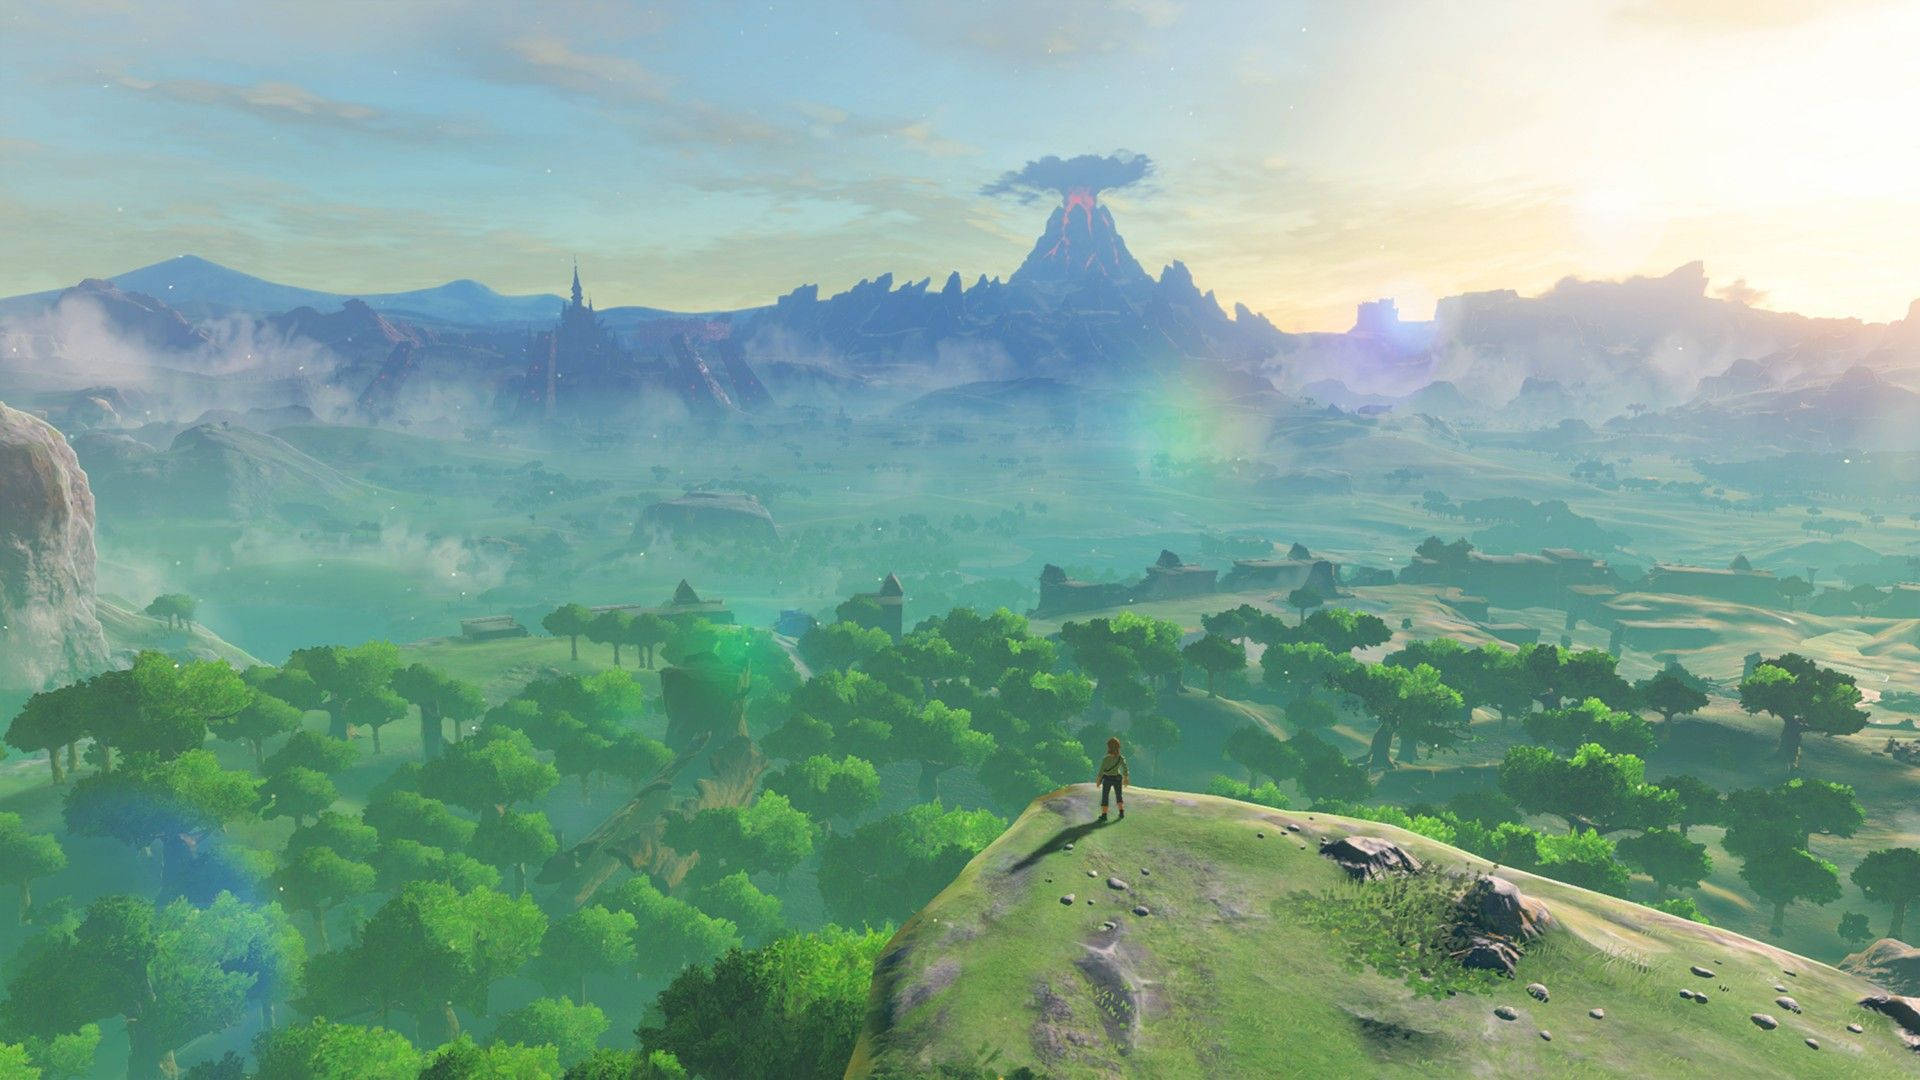 "Exploring the world of Hyrule in Breath Of The Wild" Wallpaper